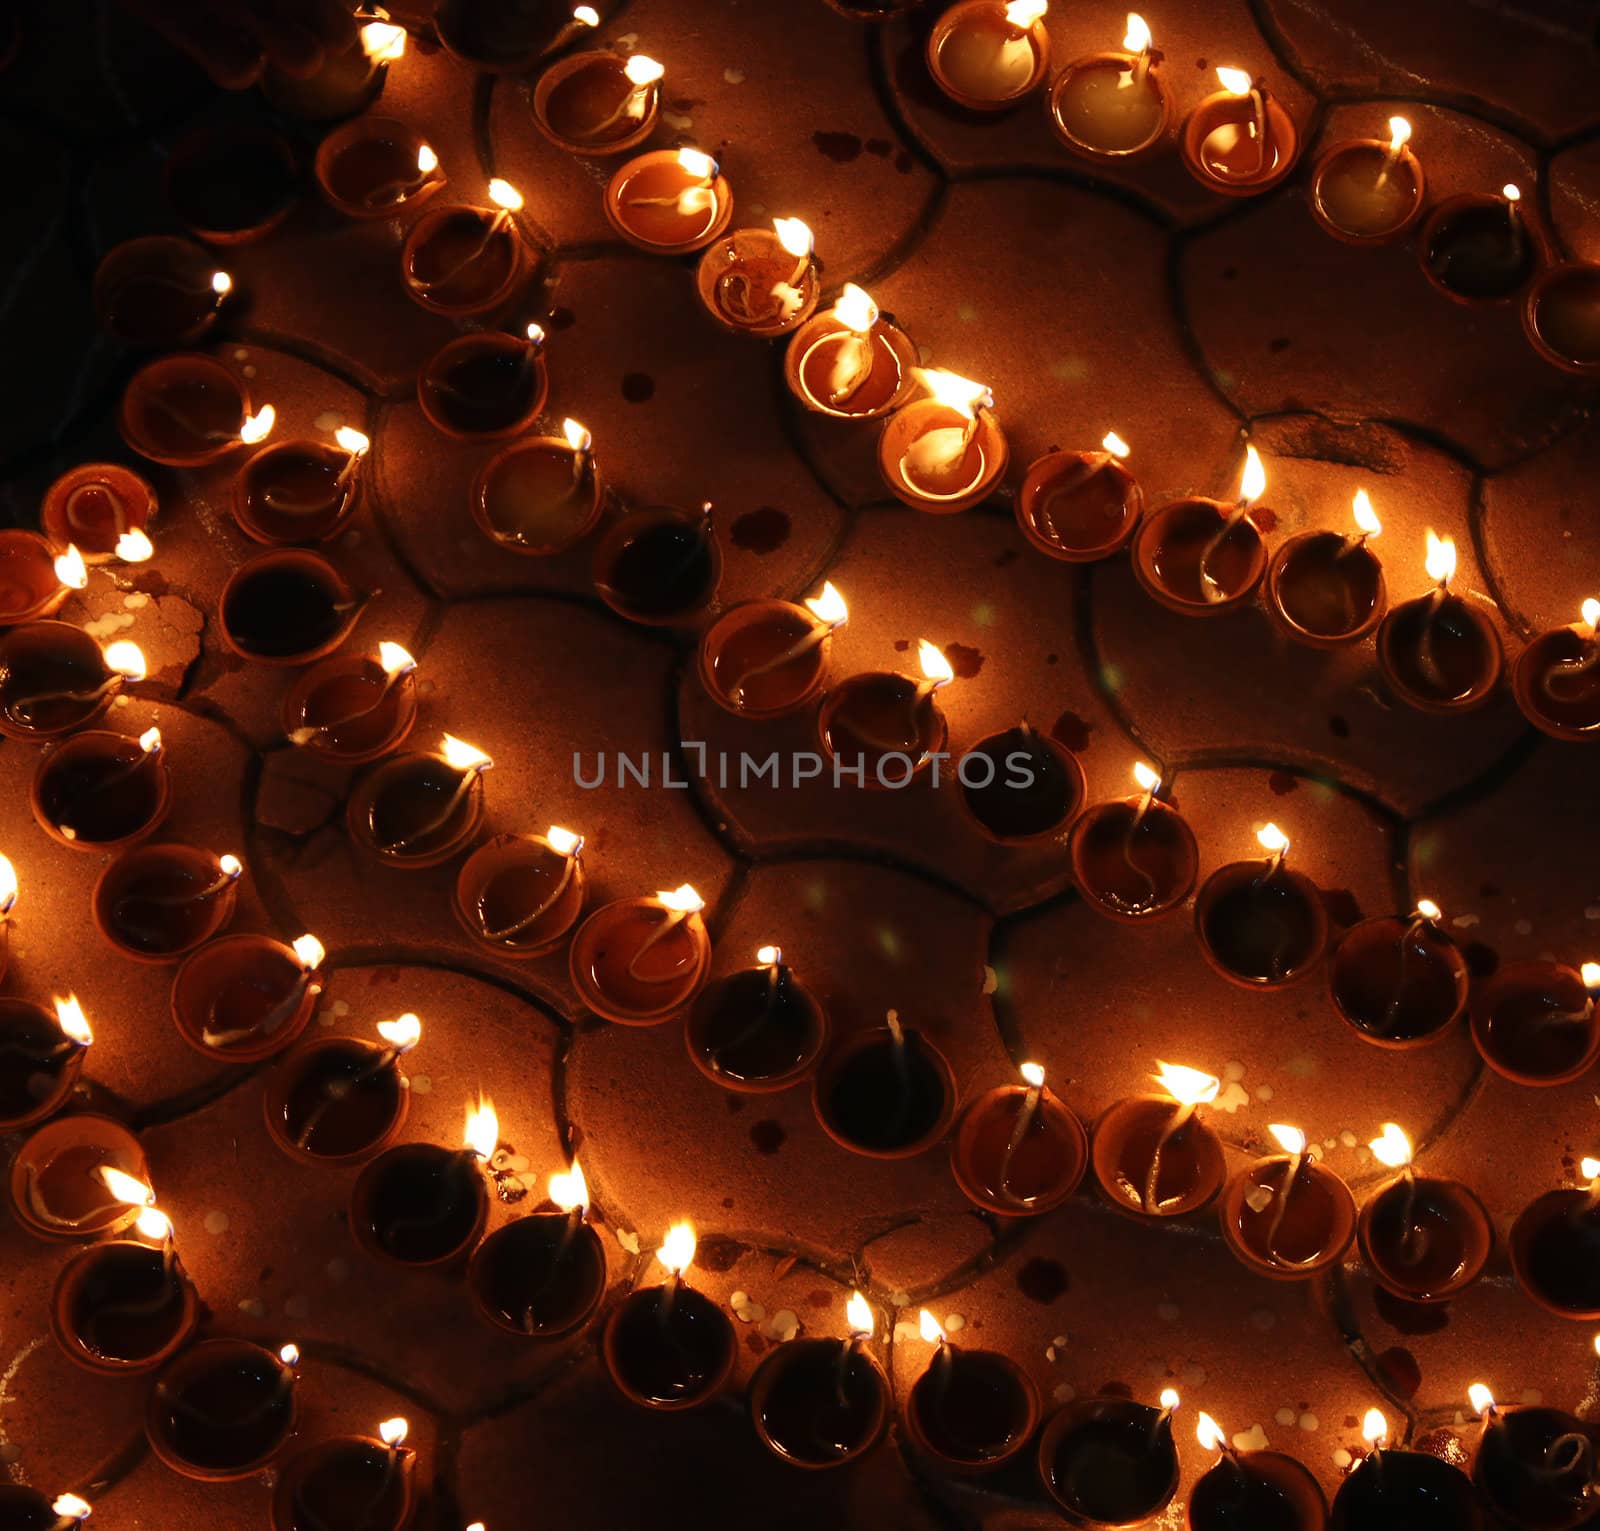 A background of traditional lit earthen lamps during Diwali festival in India.